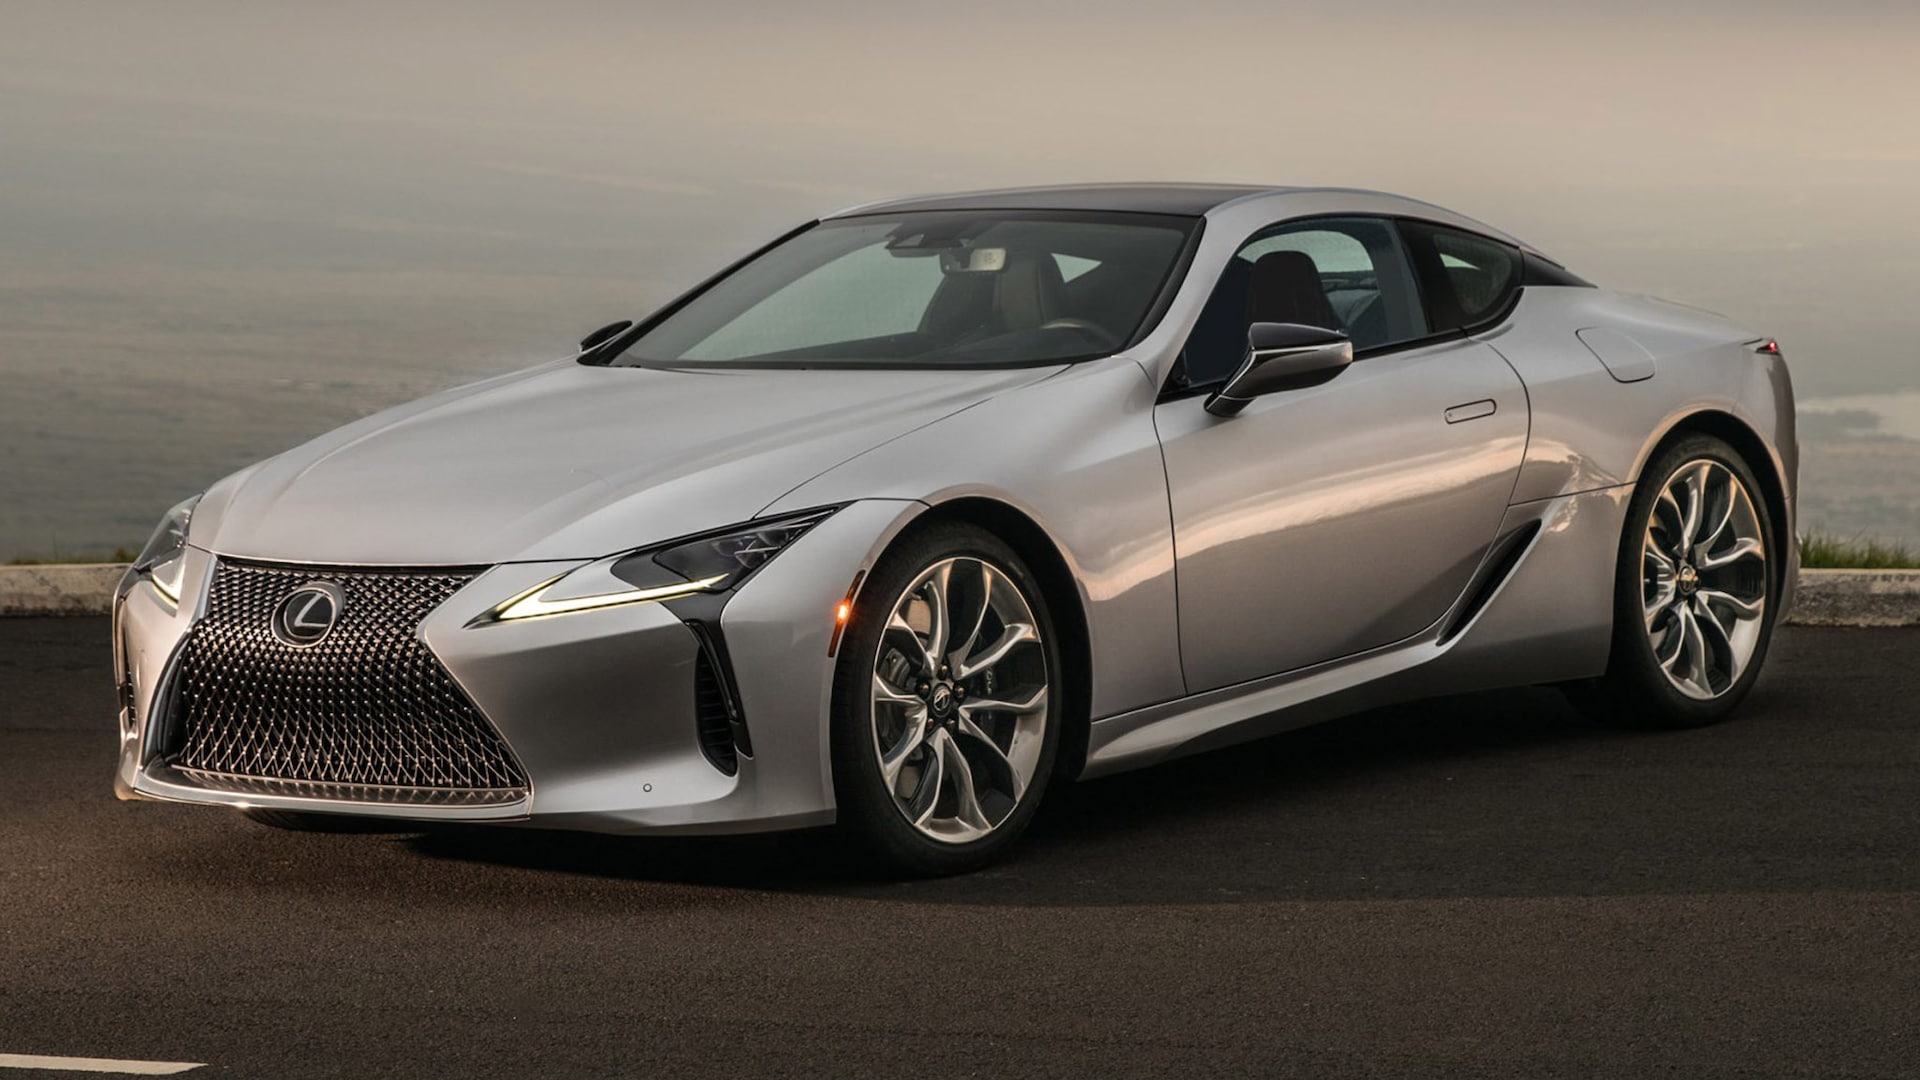 2022 Lexus LC Prices, Reviews, and Photos - MotorTrend